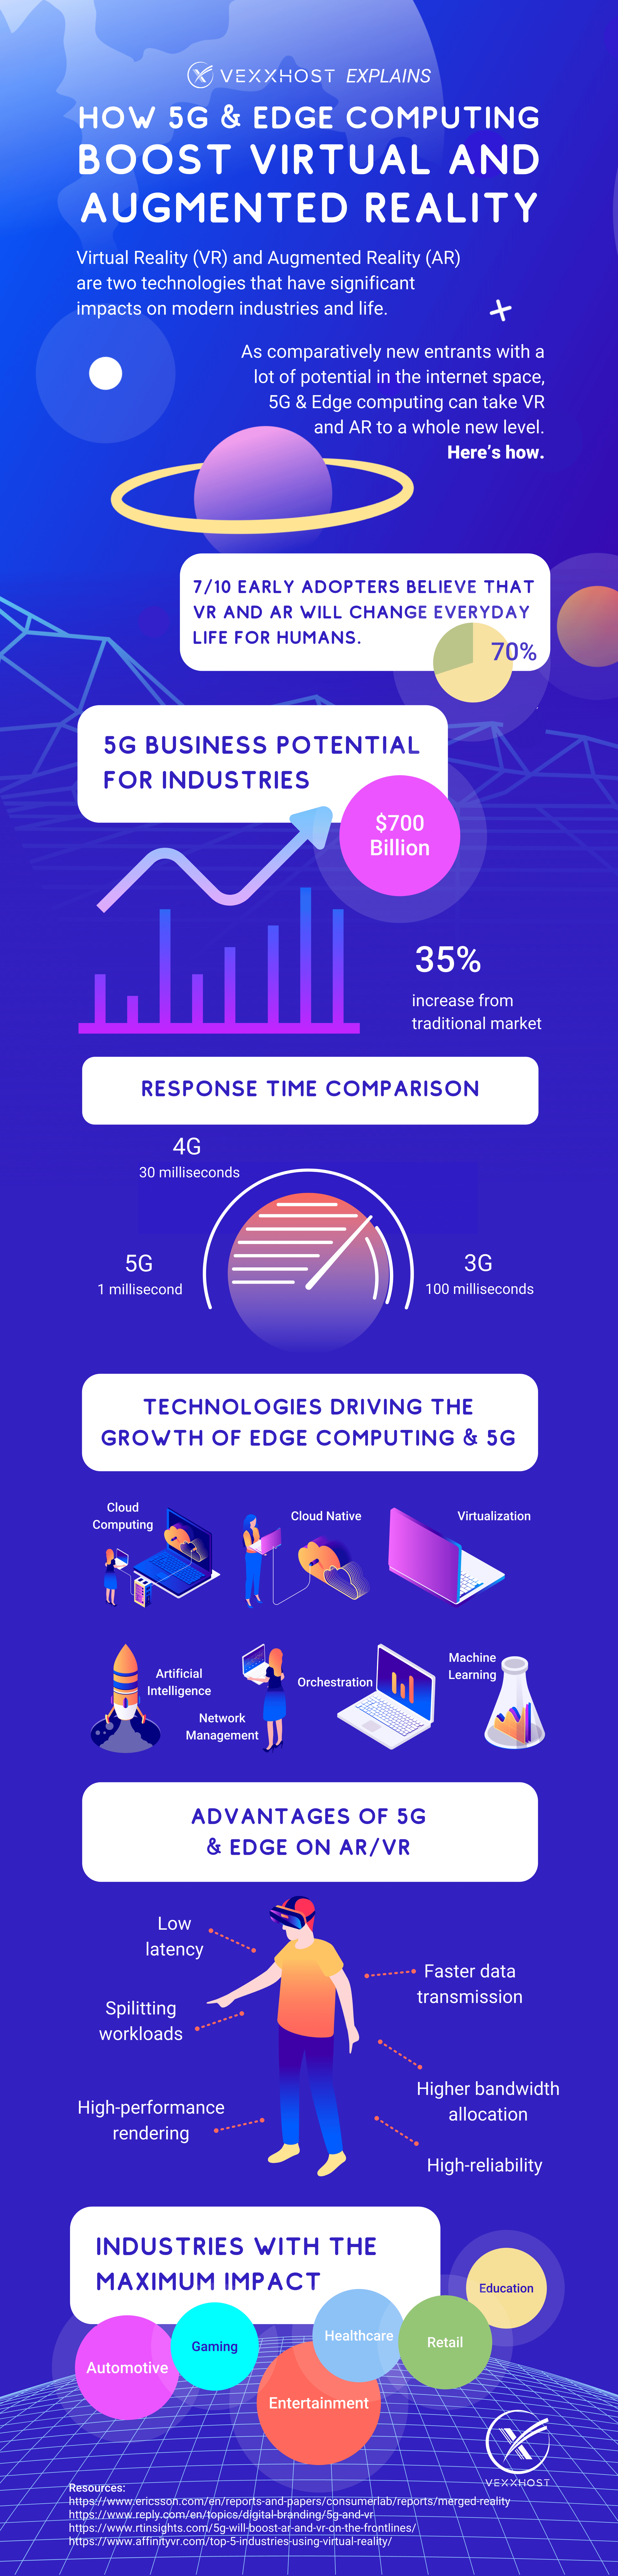 How-5G-Edge-Computing-Boost-Virtual-and-Augmented-Reality